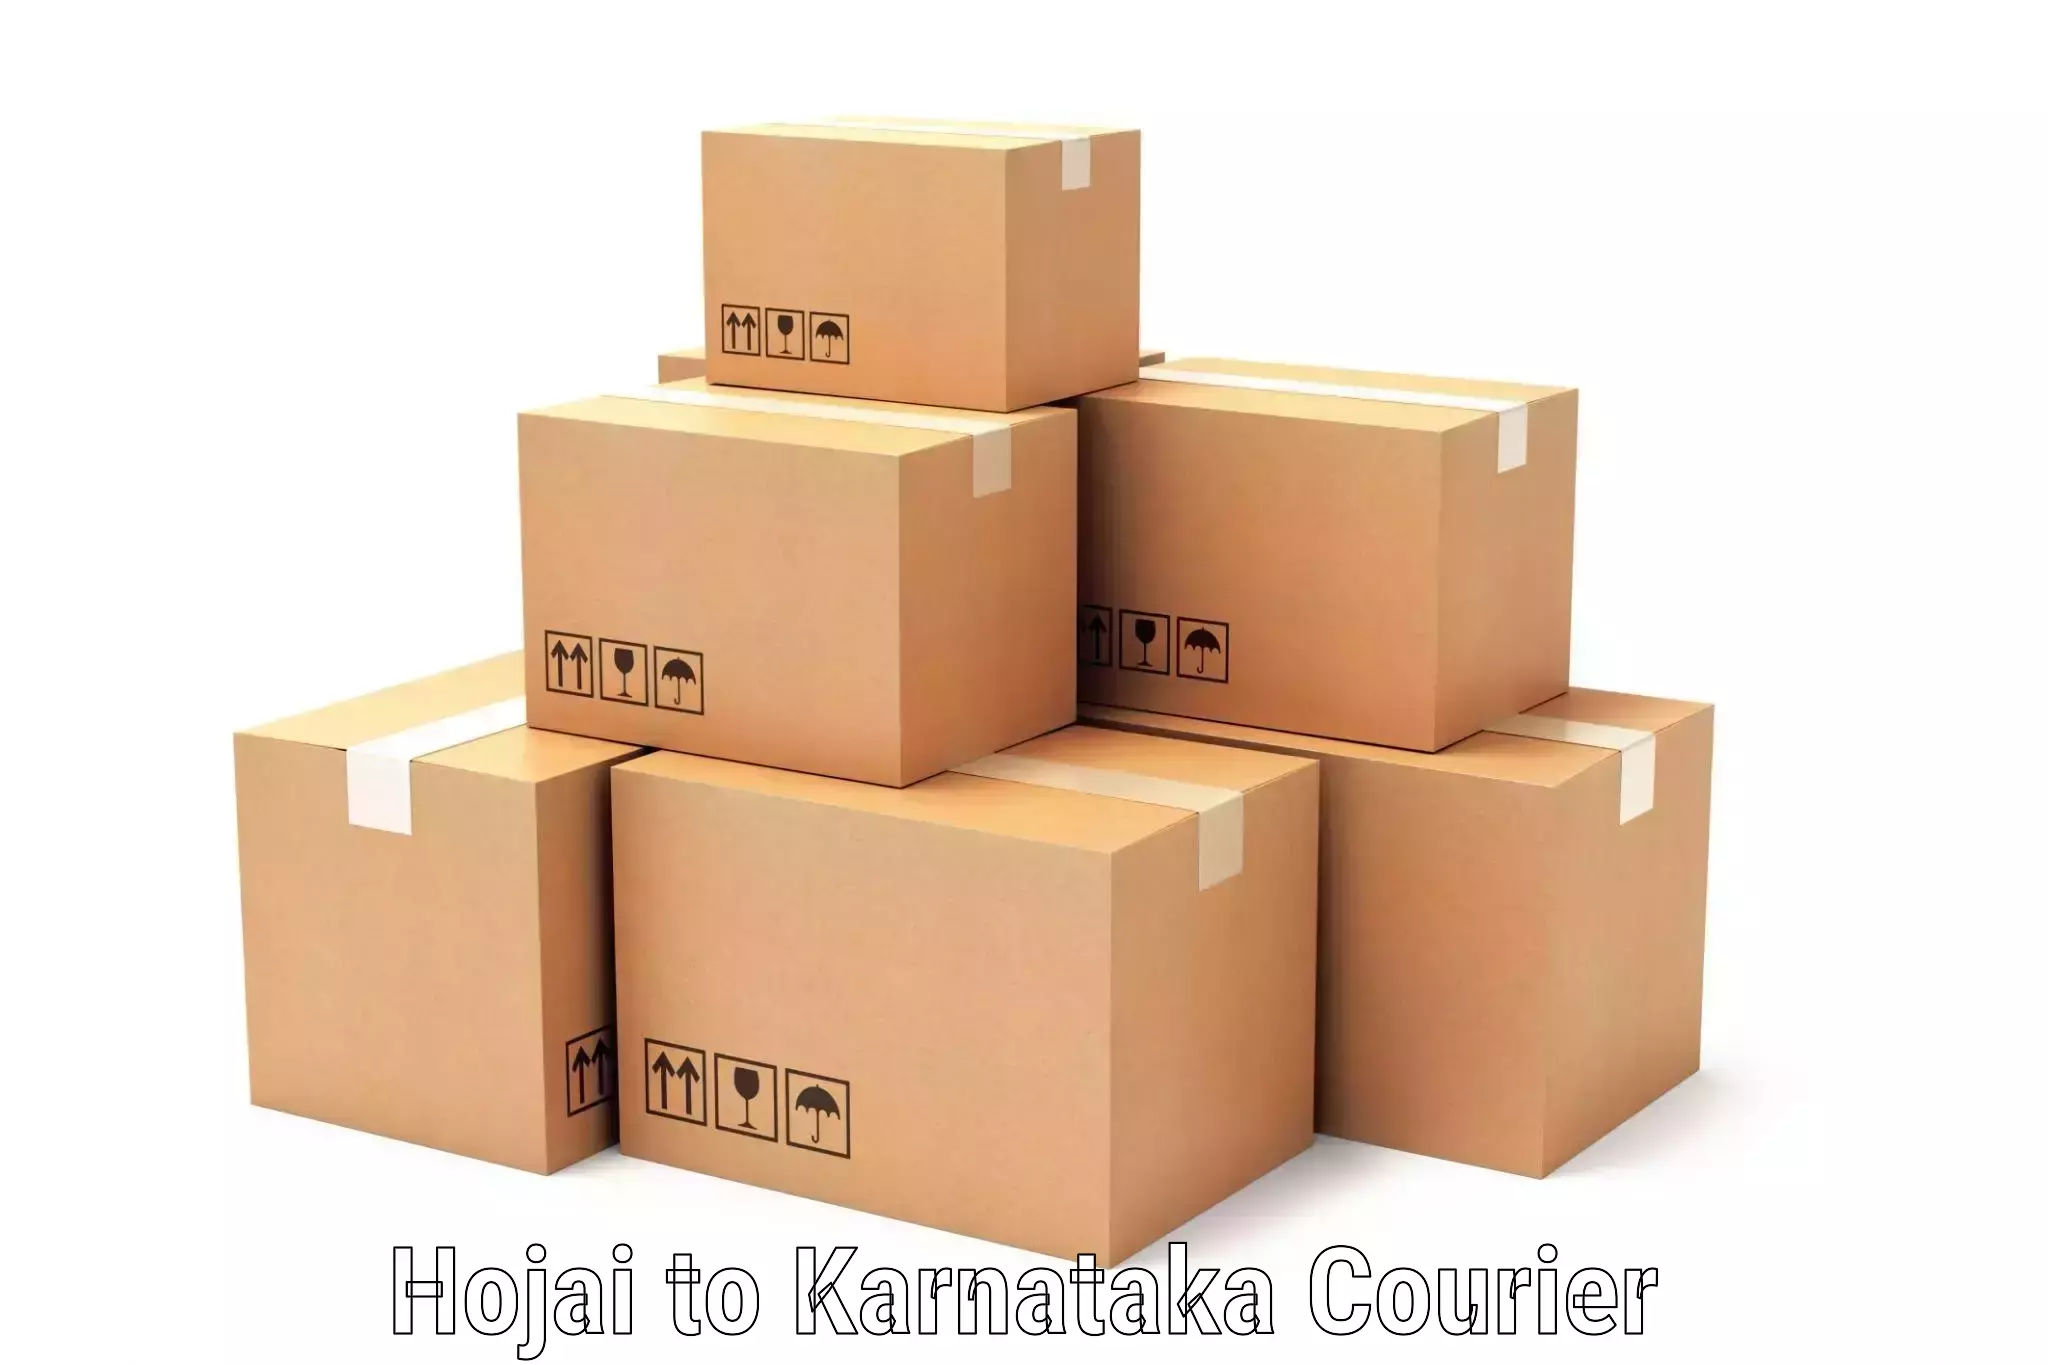 Customer-oriented courier services Hojai to Mangalore Port